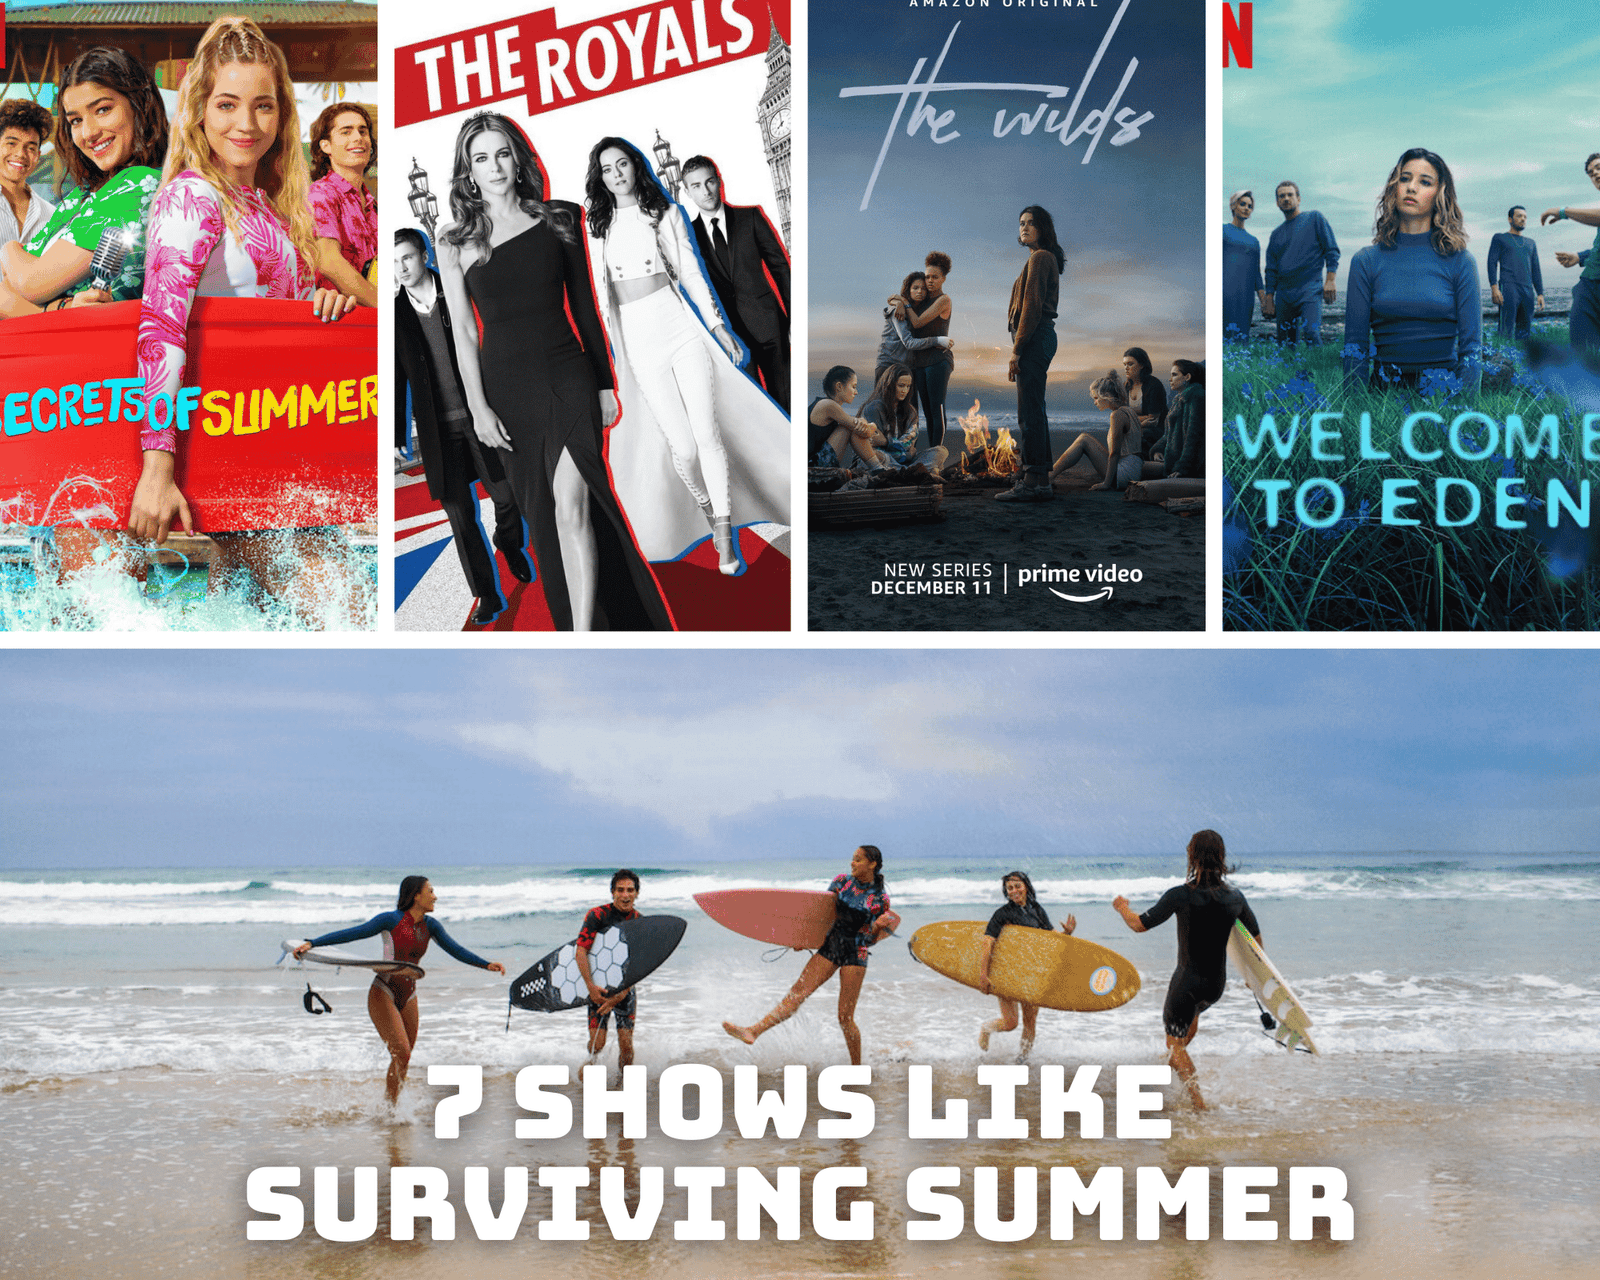 7 Shows Like Surviving Summer - What to Watch Until Surviving Summer Season 2?